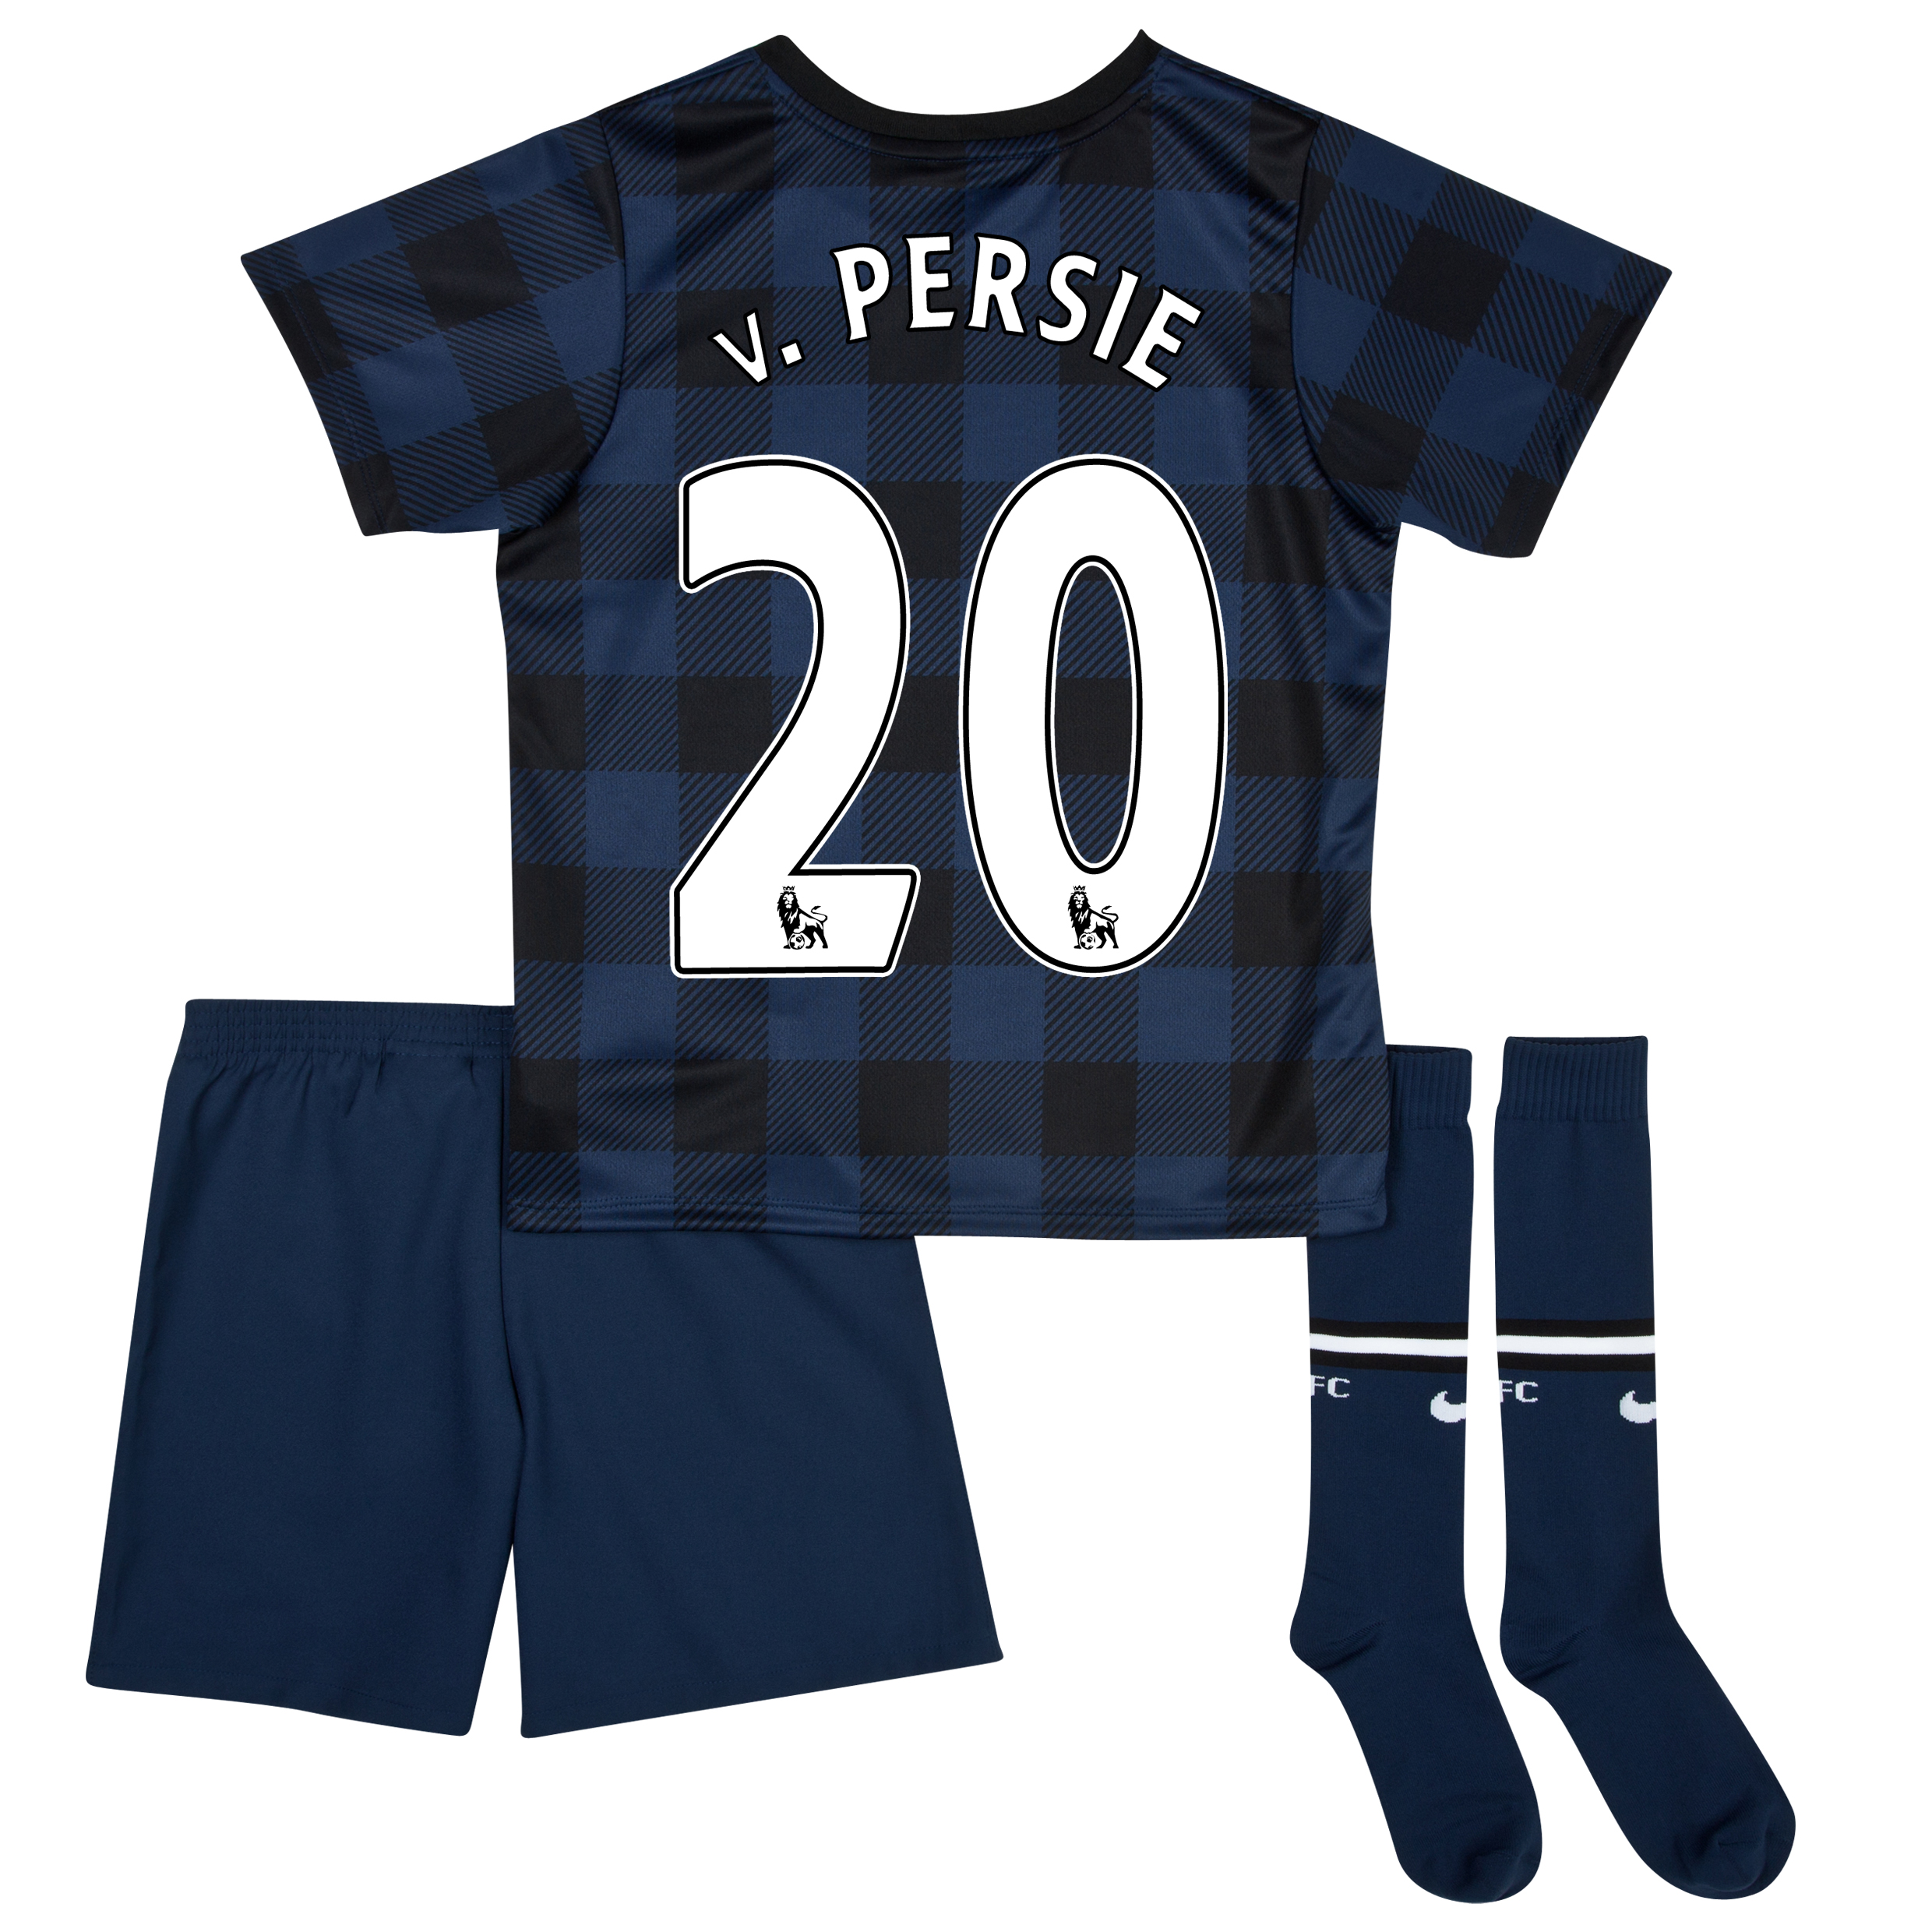 Manchester United Away Kit 2013/14 - Little Boys with v.Persie 20 printing